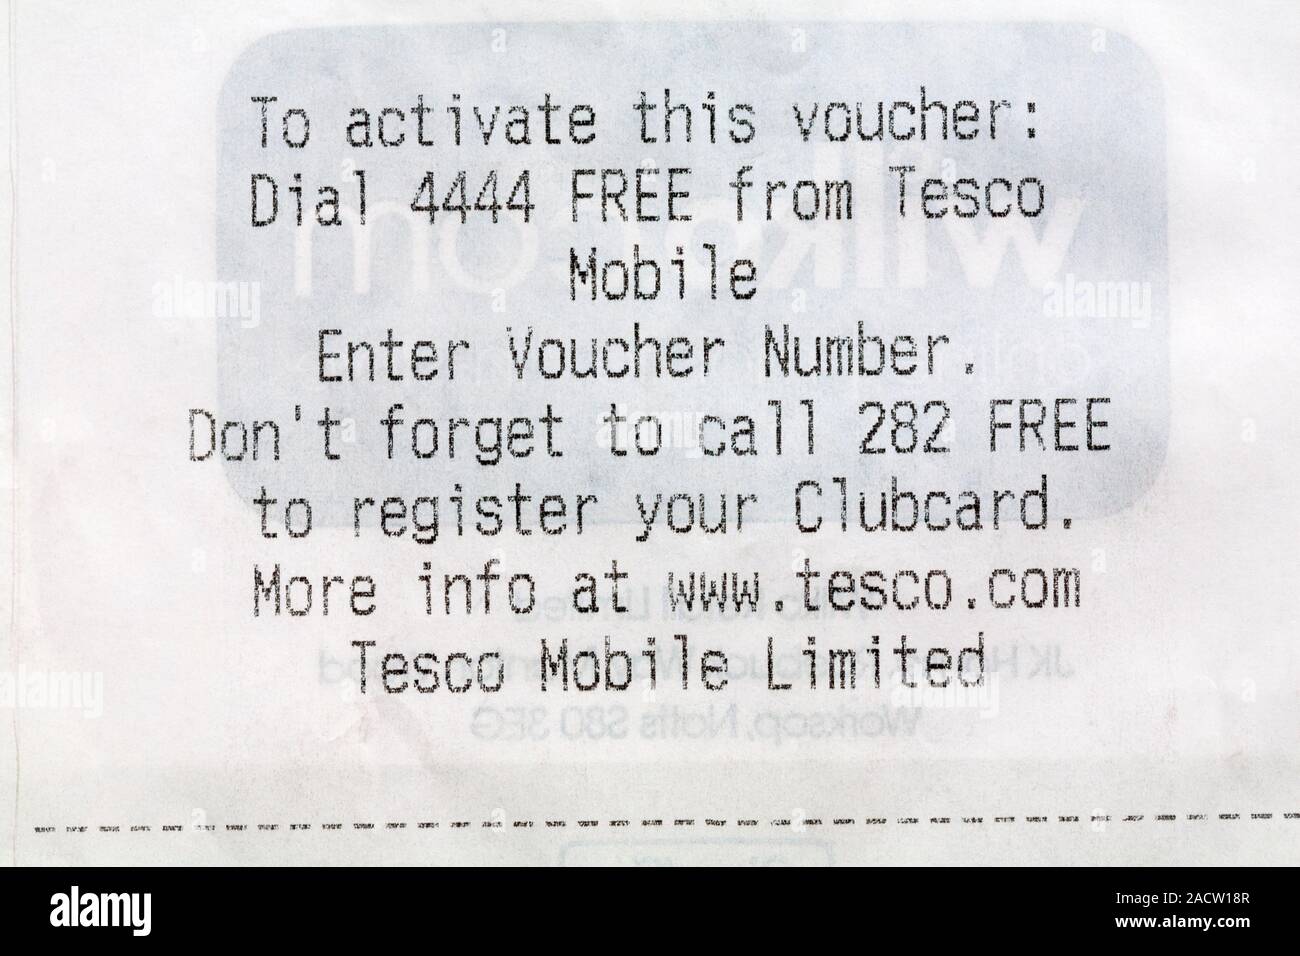 activate this dial 4444 free Tesco Mobile - details on receipt voucher Photo - Alamy